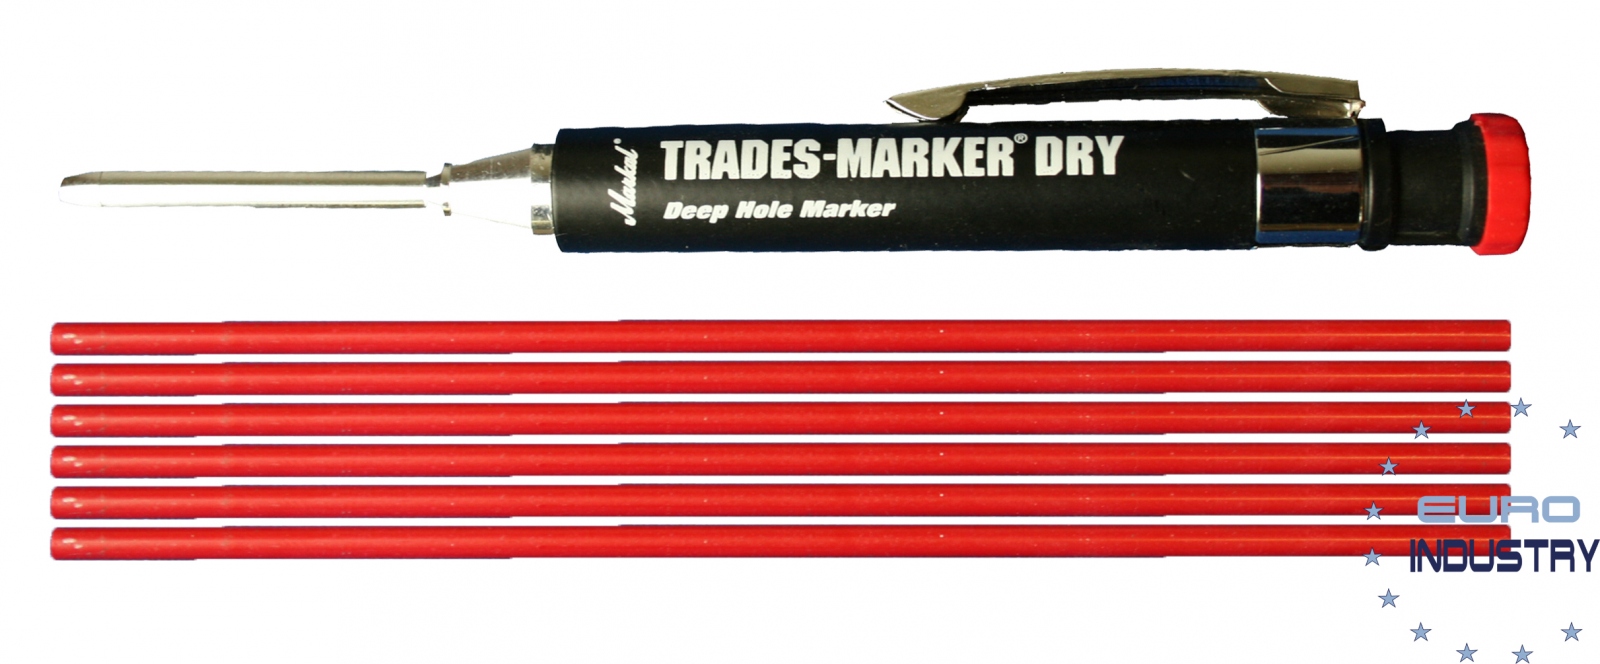 pics/Markal/E.I.S. Copyright/markal-trades-marker-dry-deep-hole-and-red-riter-mines-refill-pack.jpg